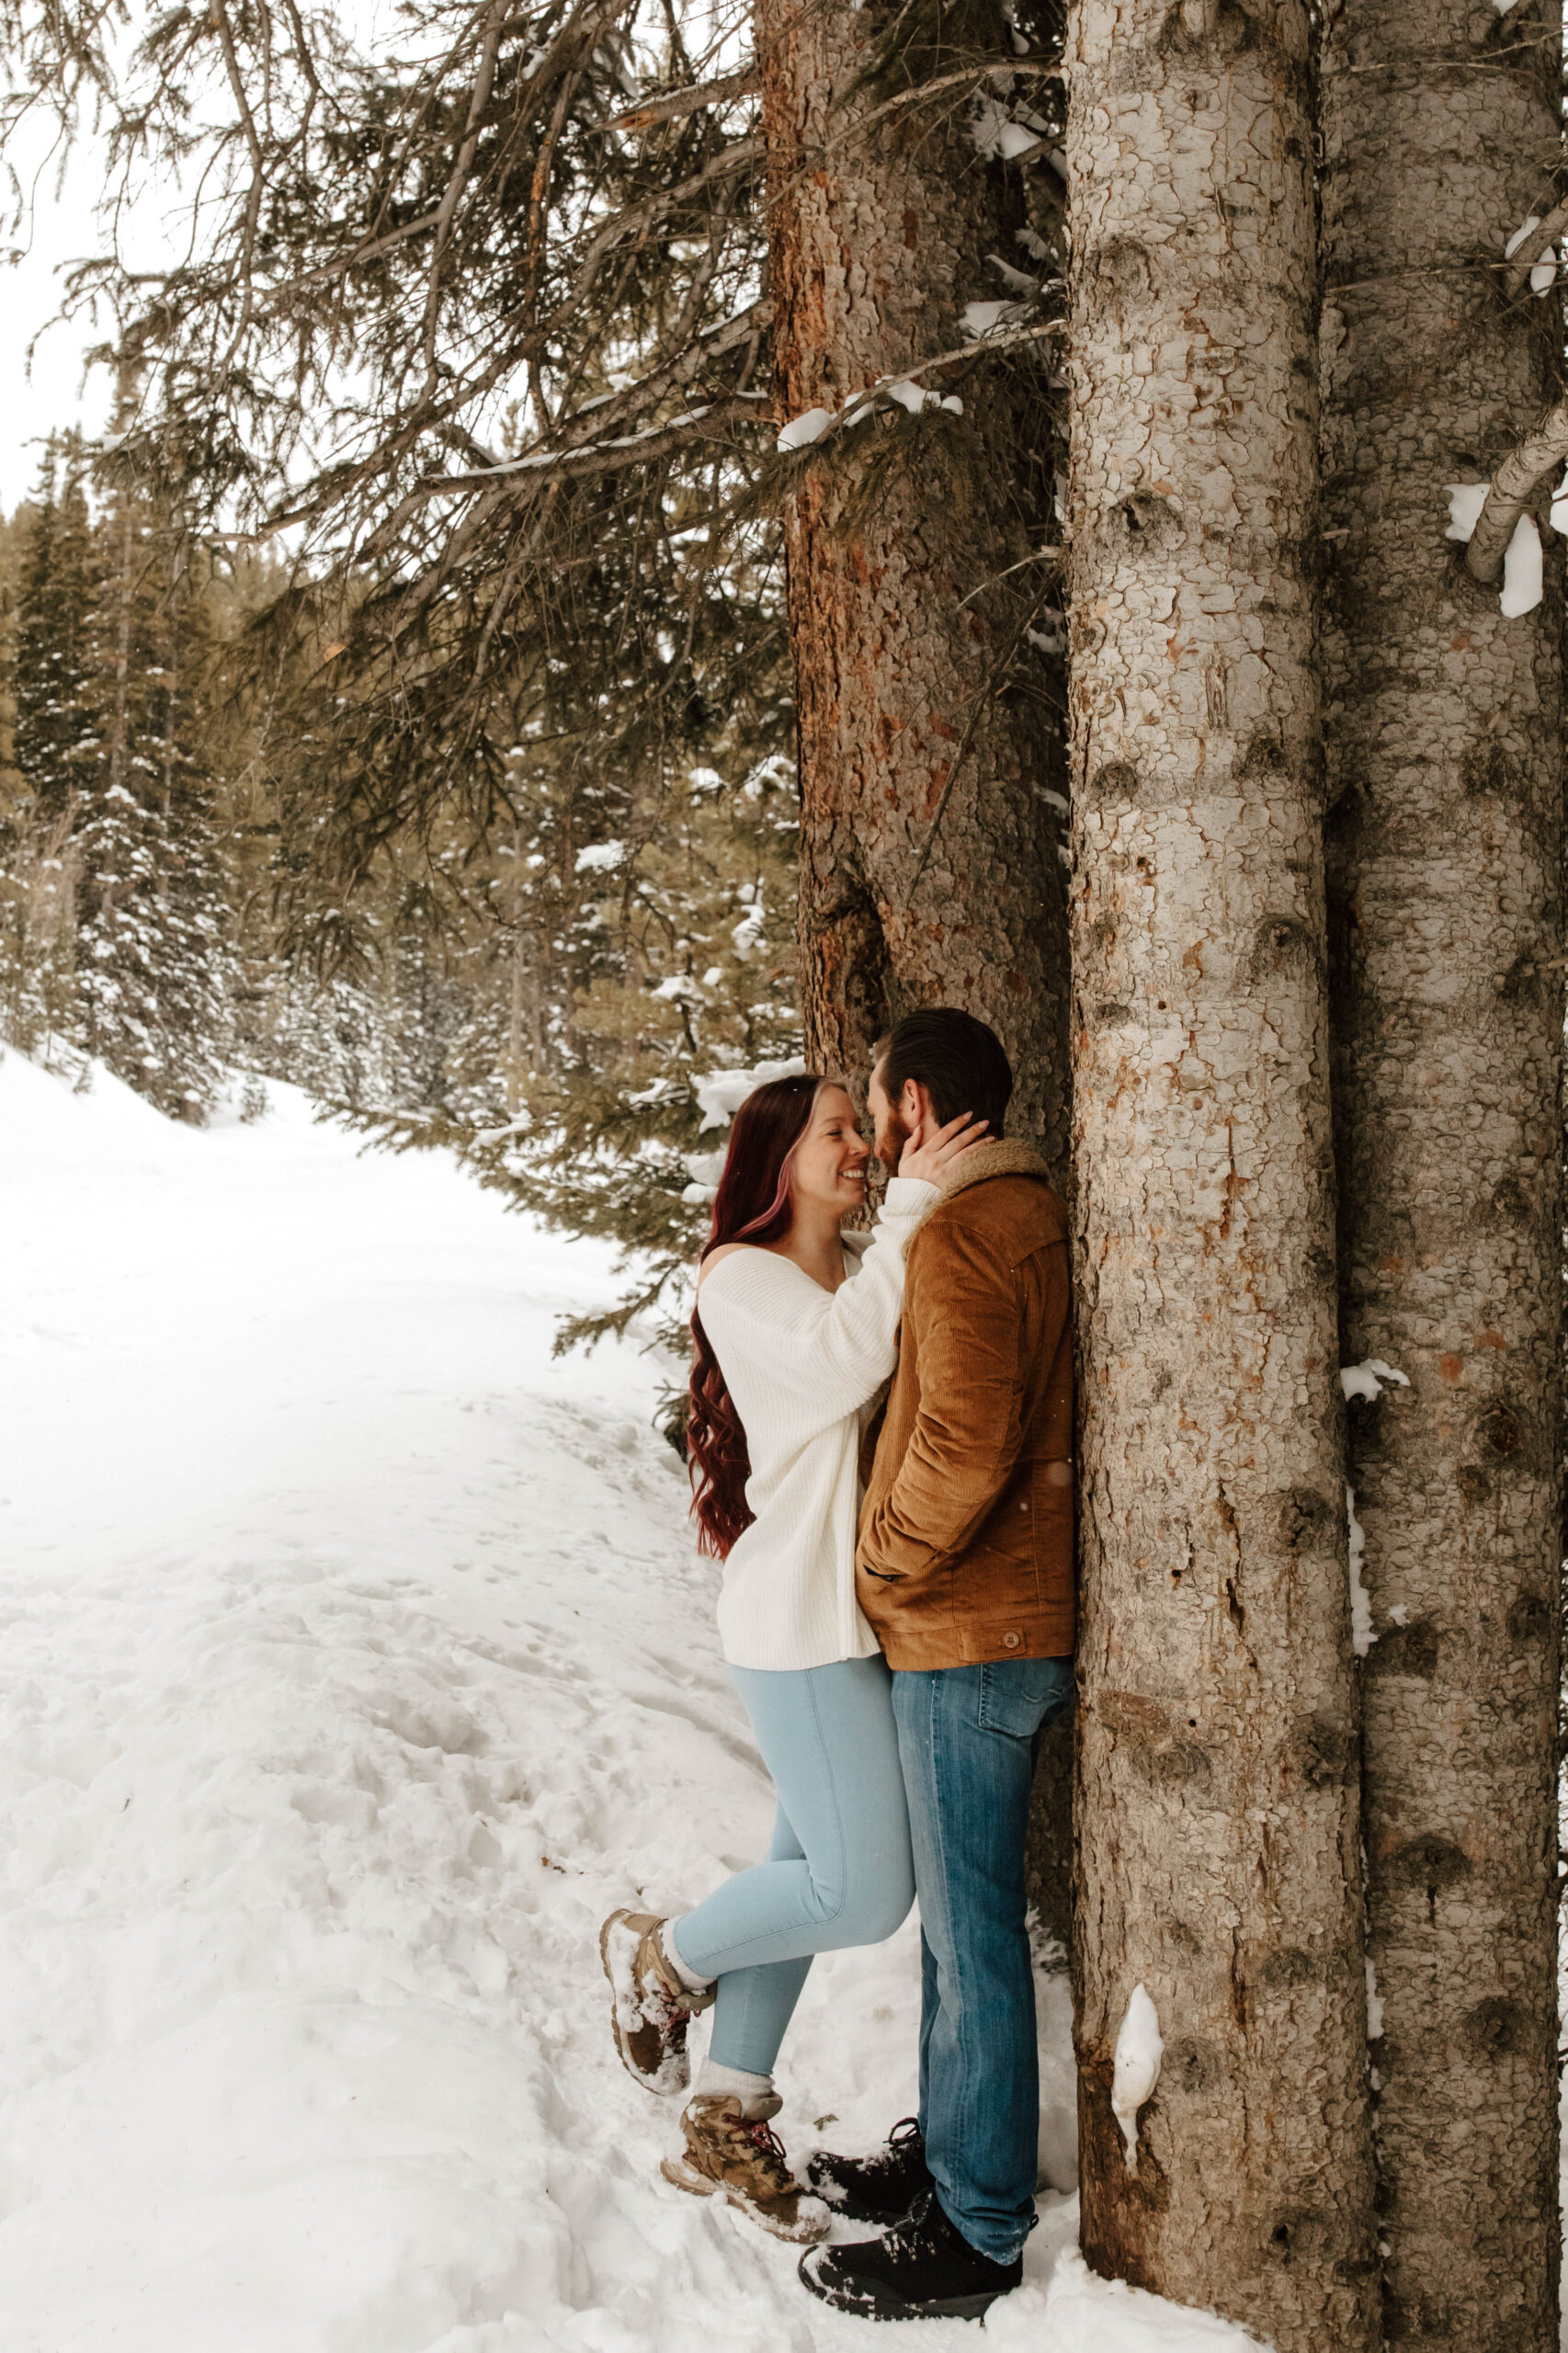 couple snuggles up together against a tree, surrounded by snow. her leg is popped